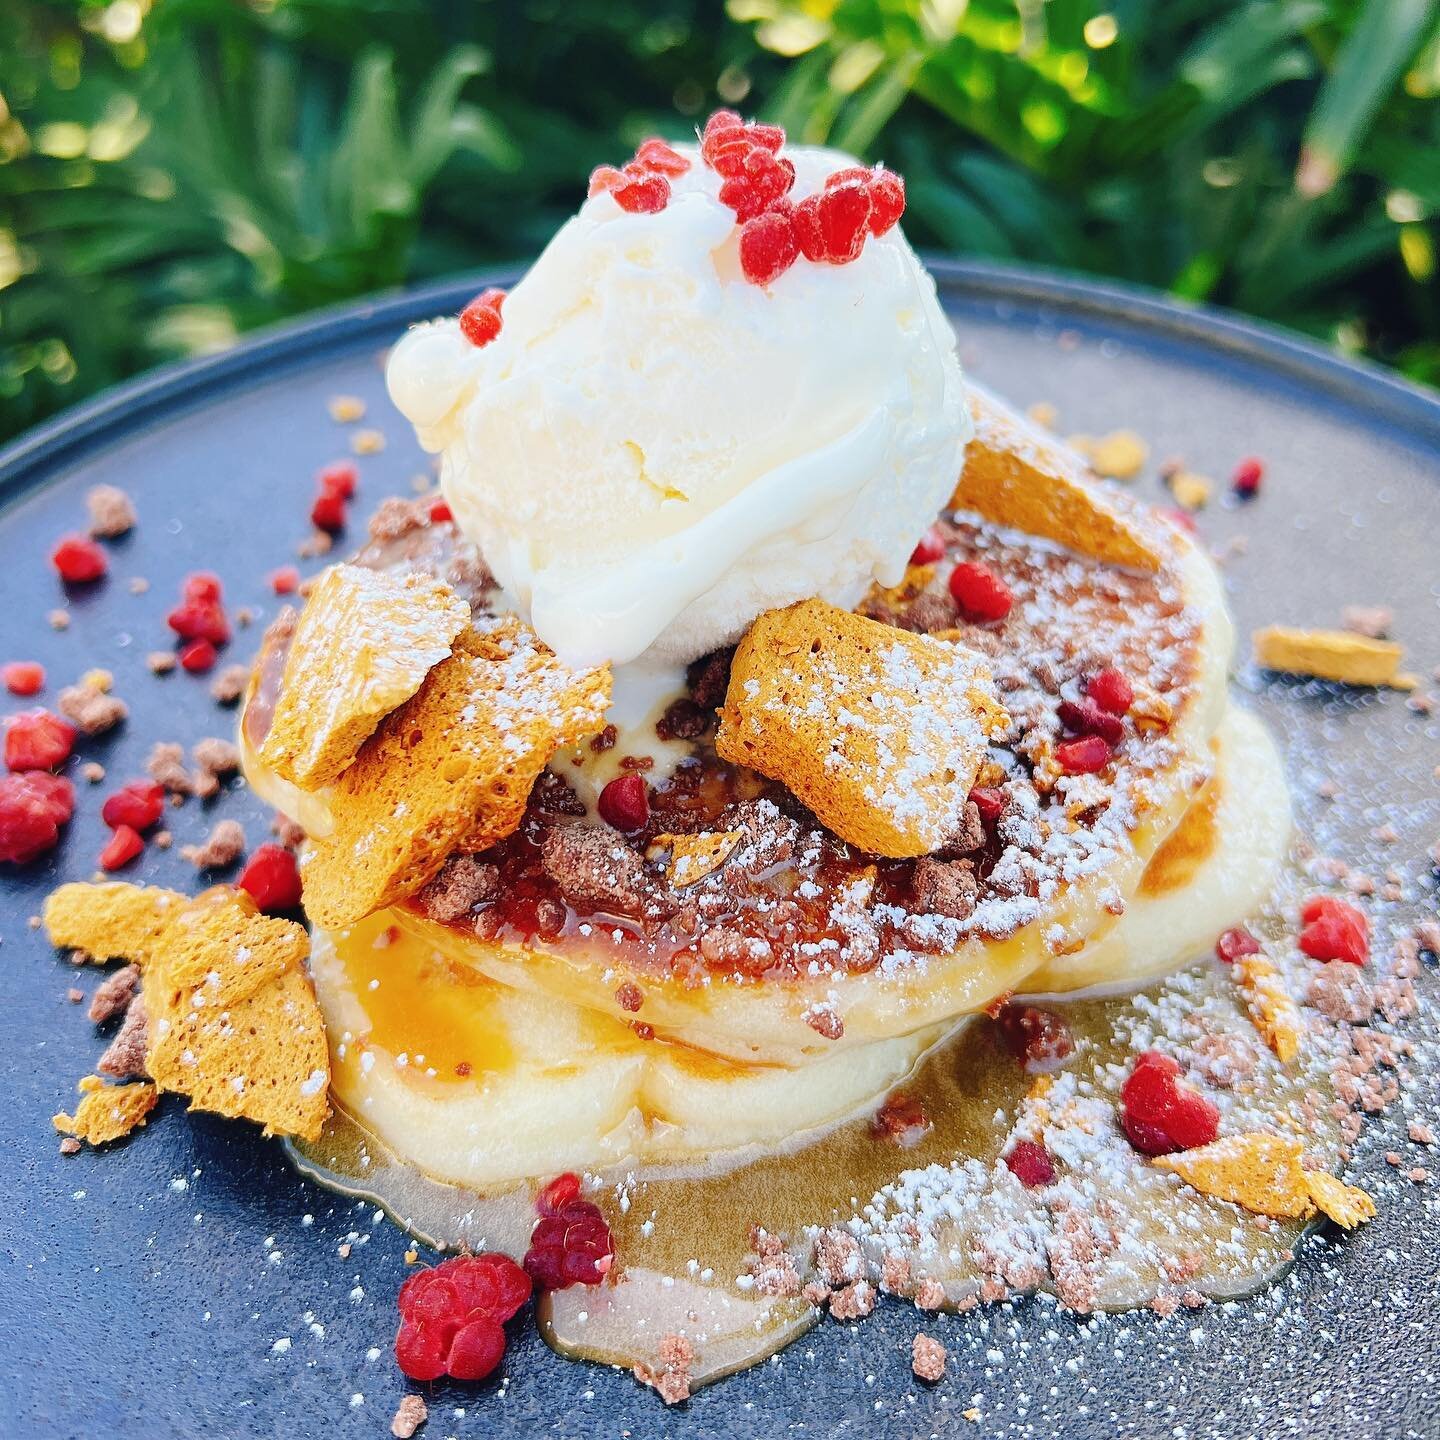 Mother&rsquo;s Day Special 🌷Caramelised White Chocolate Pancakes ✨
2 pancakes with house-made caramelised white chocolate sauce, house-made honeycomb, chocolate rocks, ice cream, raspberry  GF
.
.
.
#thejampantry #brisbaneeats #brisbanecafe #brisban